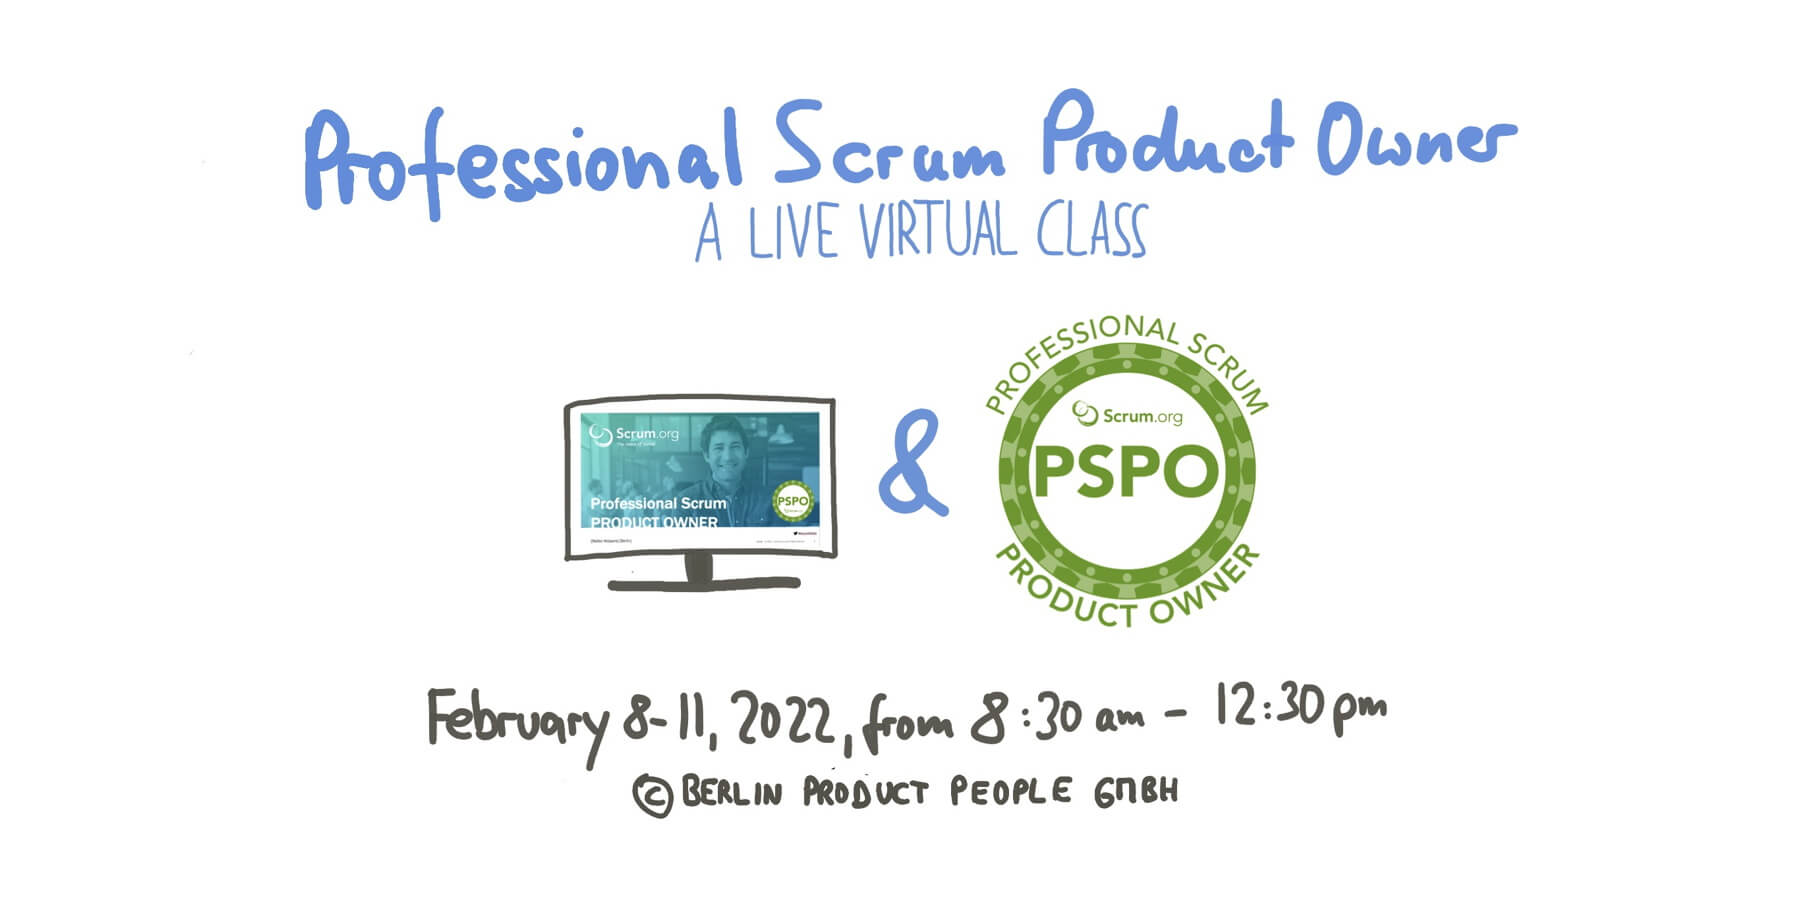 Professional Scrum Product Owner Onlineschulung mit PSPO I Zertifizierung — 8. bis 11. Februar 2022 — Berlin Product People GmbH